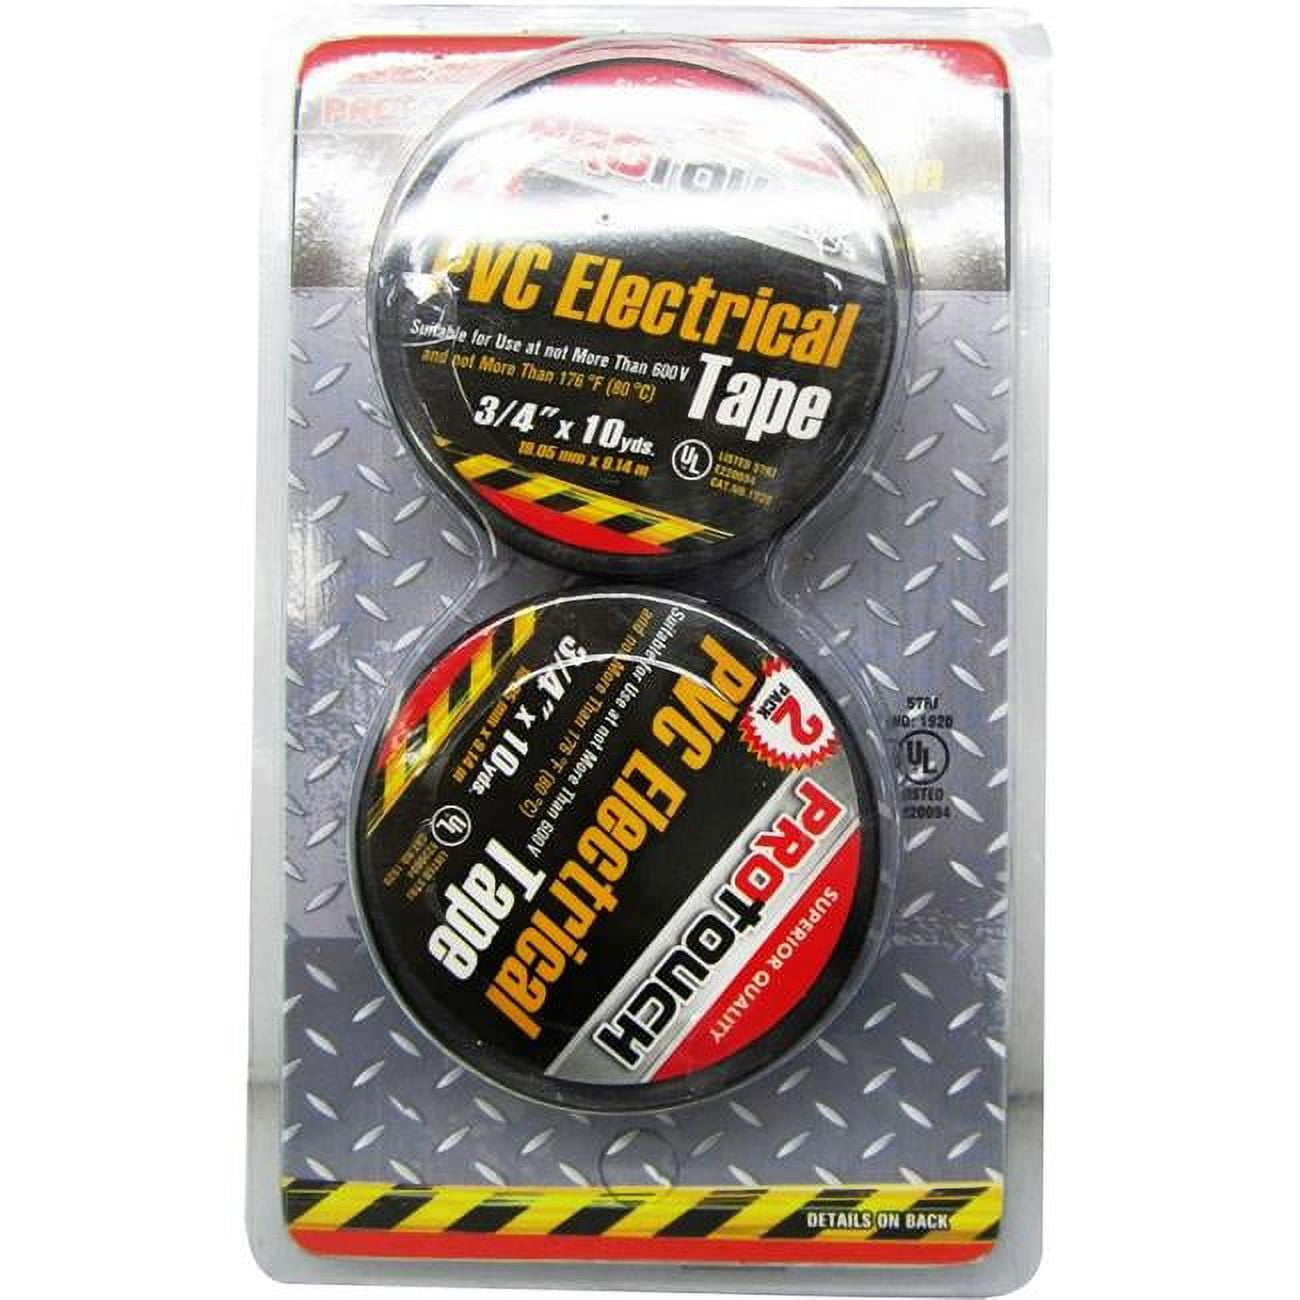 2316271 Pvc Electrical Tape, Black - Pack Of 2 - Case Of 48 - 48 Per Pack